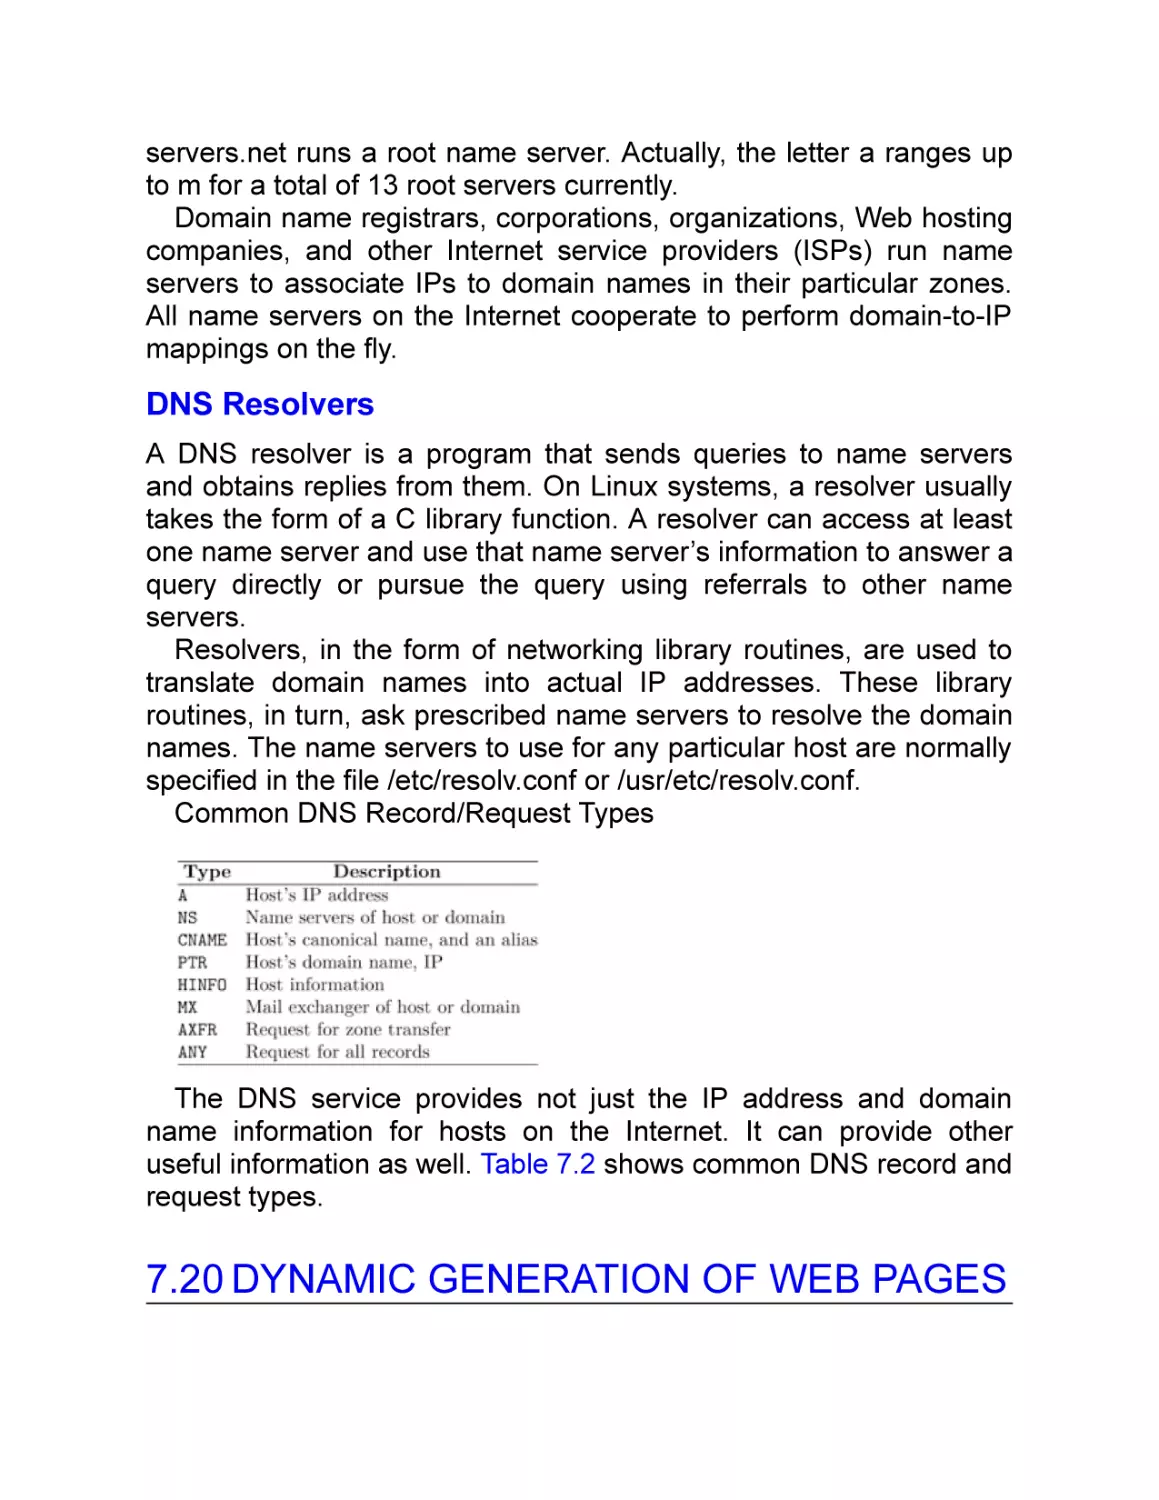 DNS Resolvers
7.20 Dynamic Generation of Web Pages